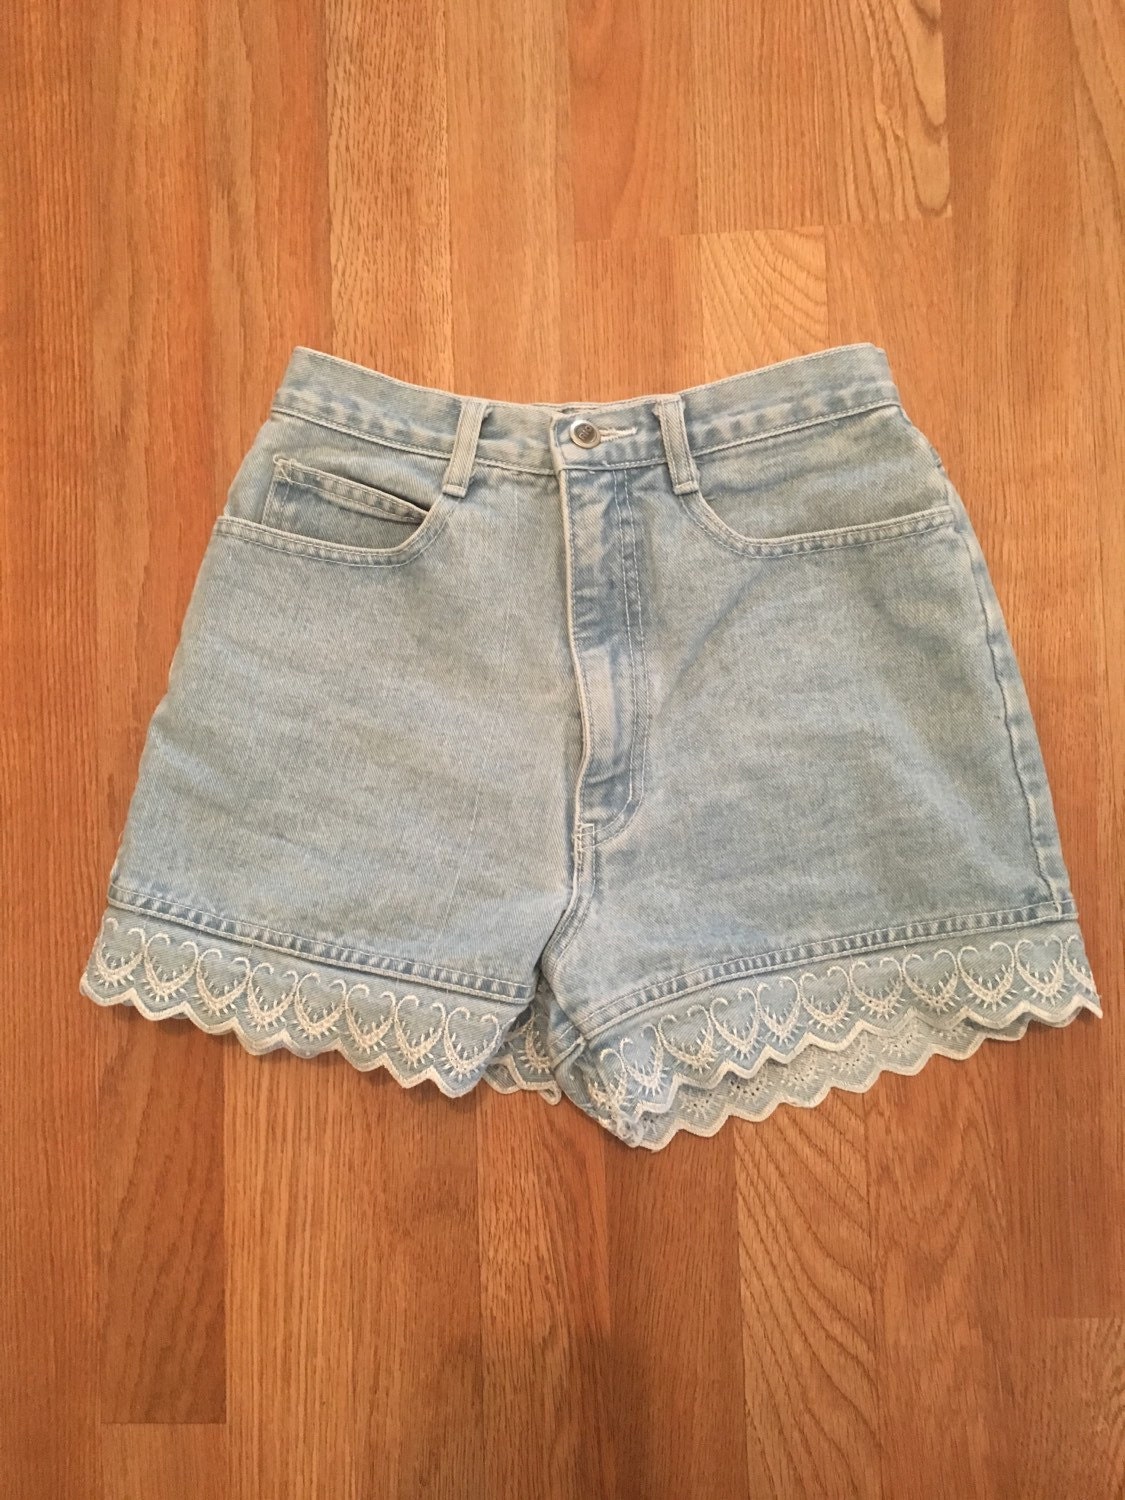 how womens high waisted shorts in inches